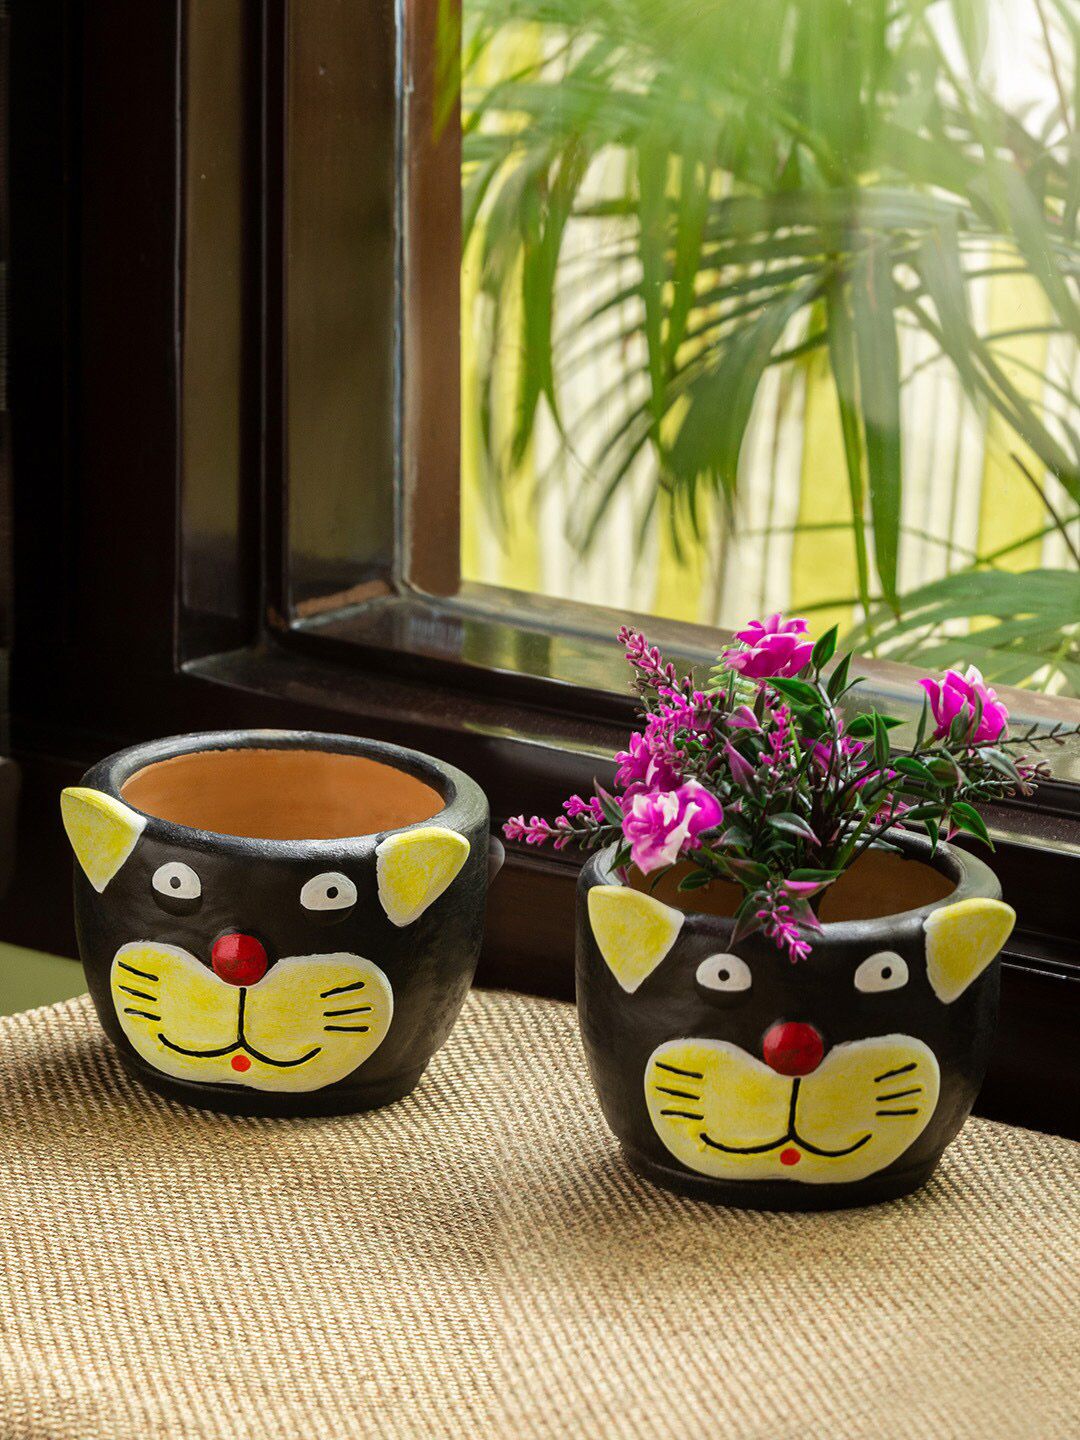 ExclusiveLane 2 Pcs Black & Yellow Meek Meow Handcrafted Terracotta Table Planter Pot Price in India